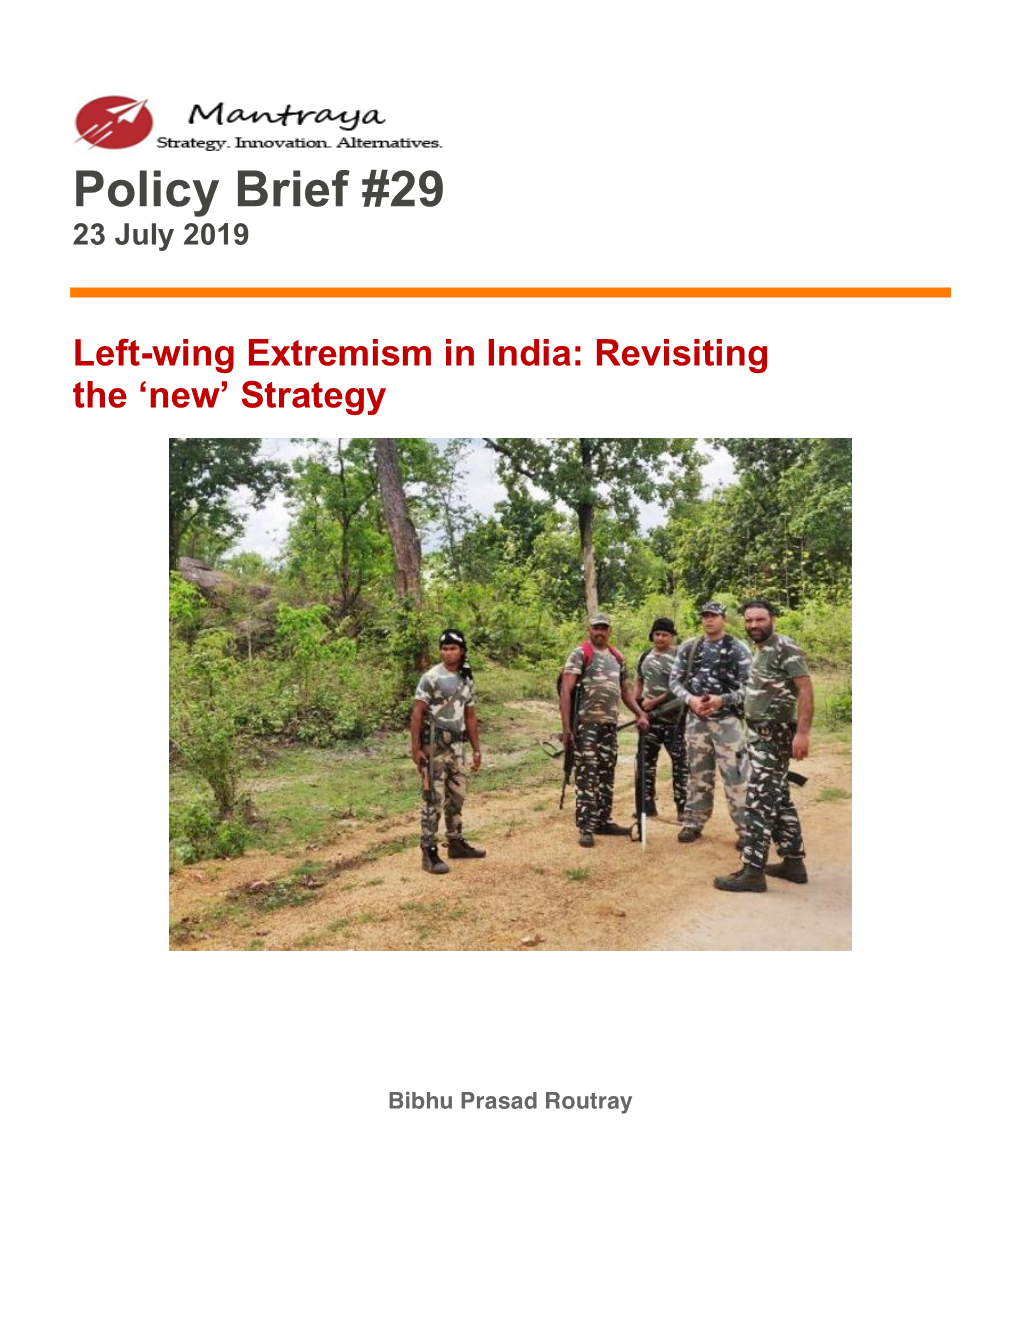 Left-Wing Extremism in India- Revisiting